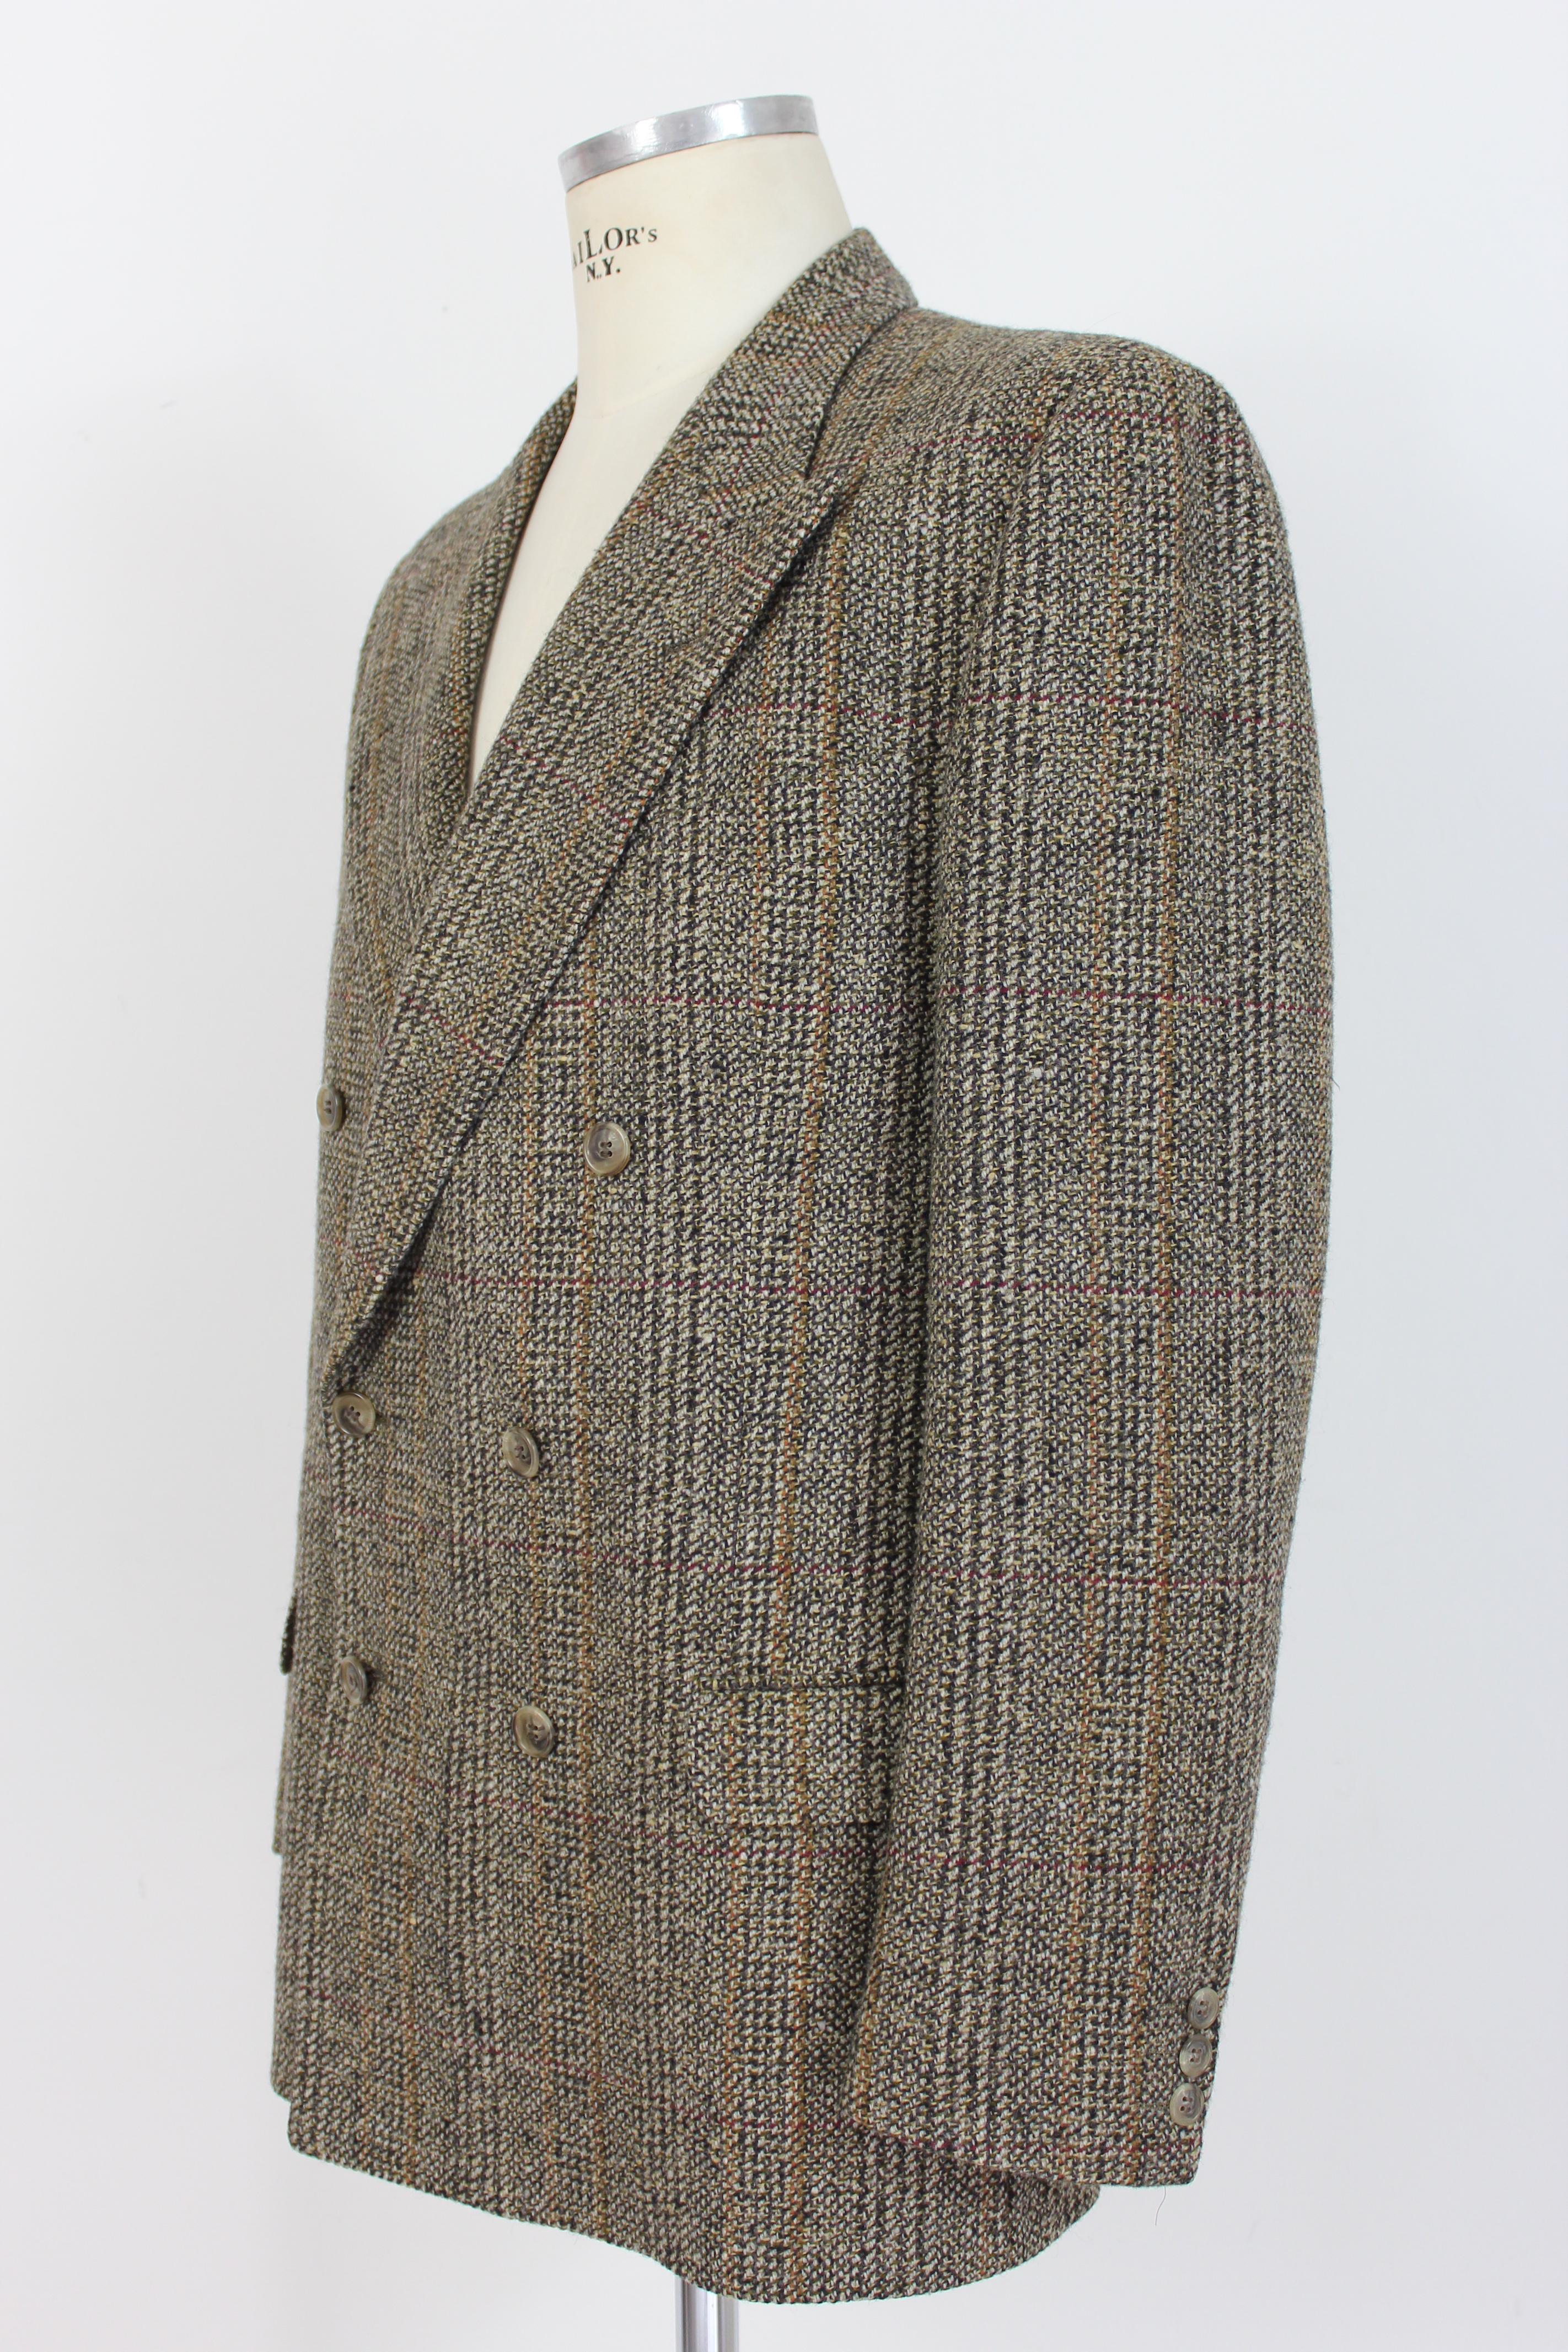 Valentino Brown Beige Wool Tweed Double Breasted Jacket In Excellent Condition In Brindisi, Bt